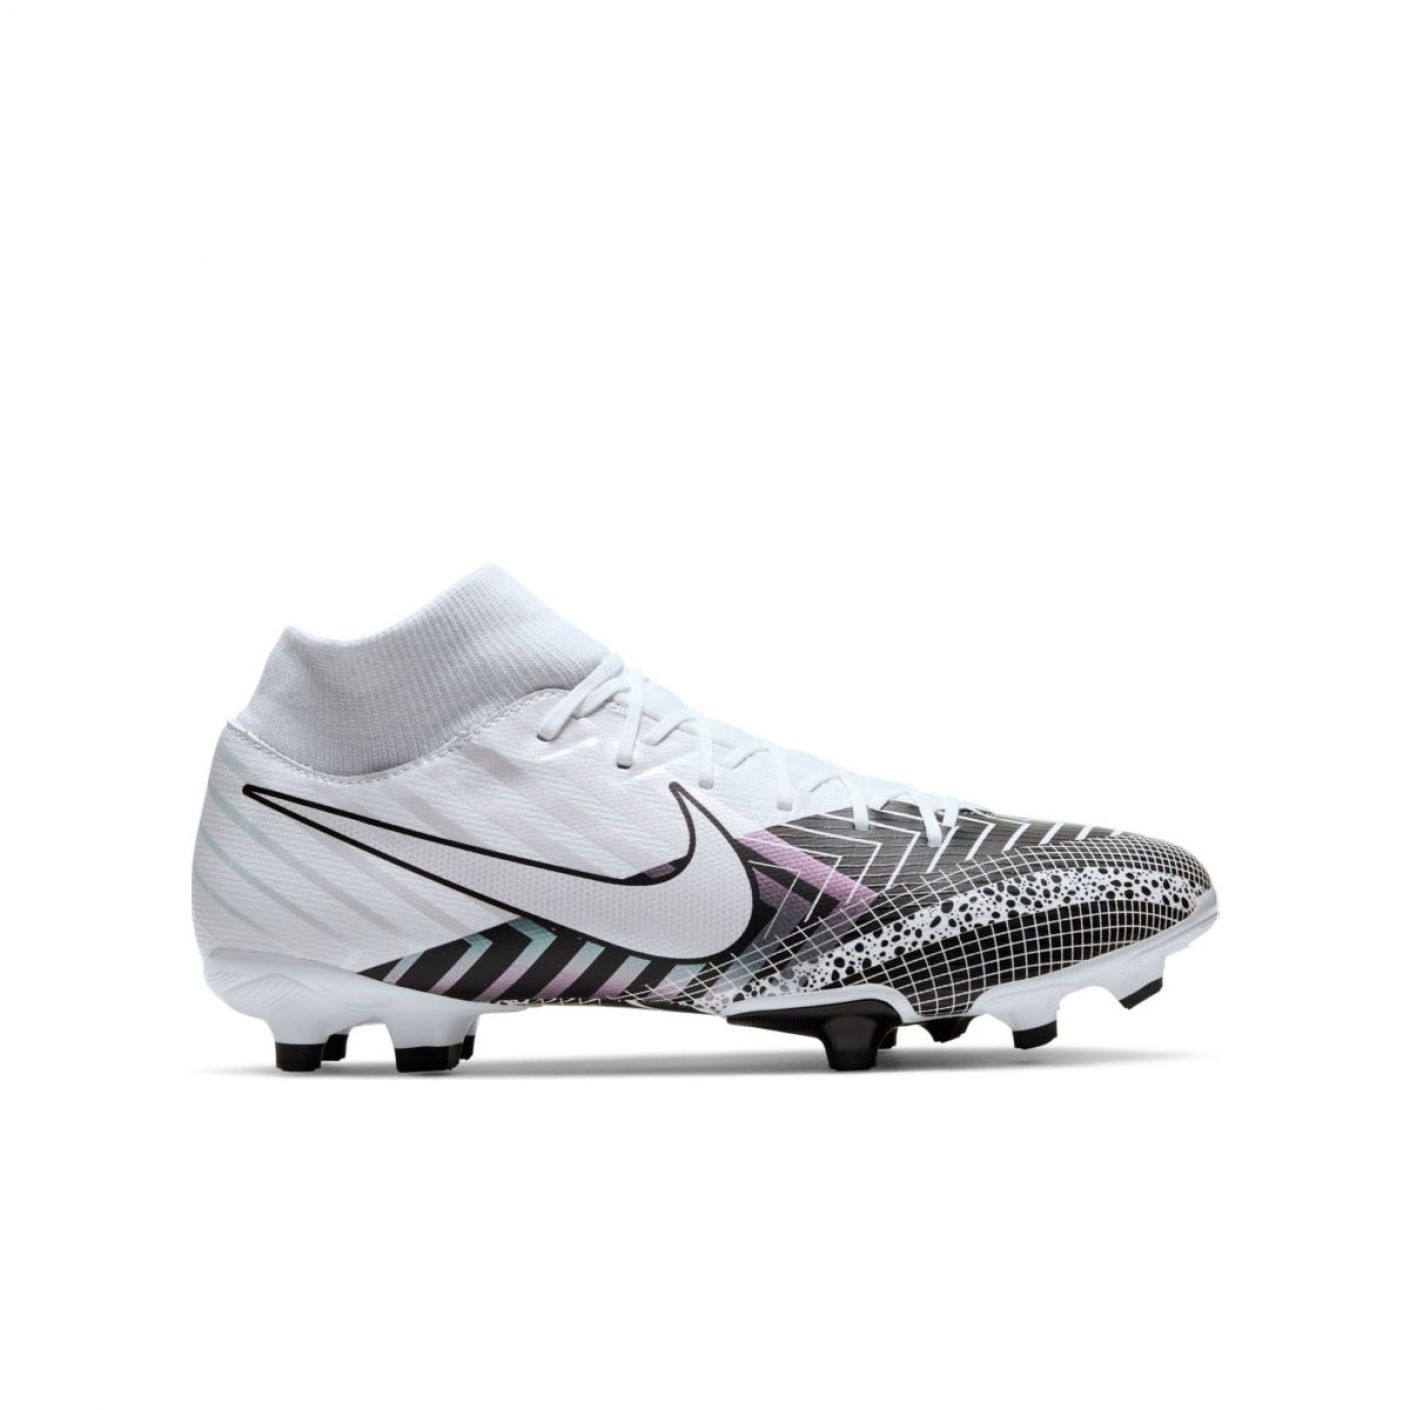 Nike Mercurial Superfly 7 Academy MDS MG White Black